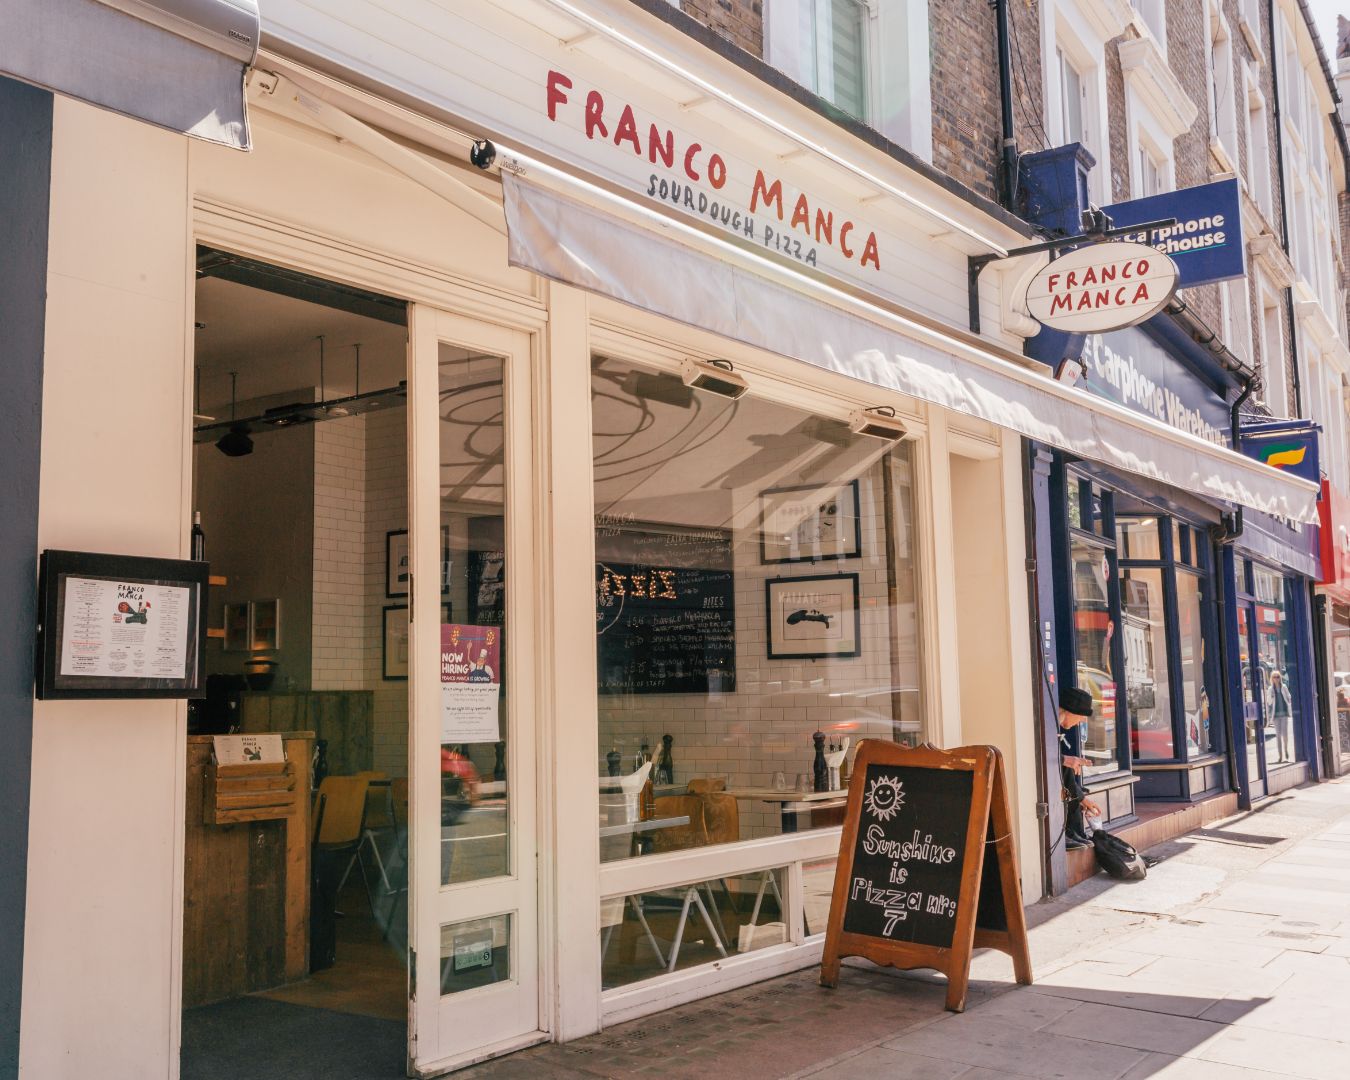 Franco Manca place in Earl's Court